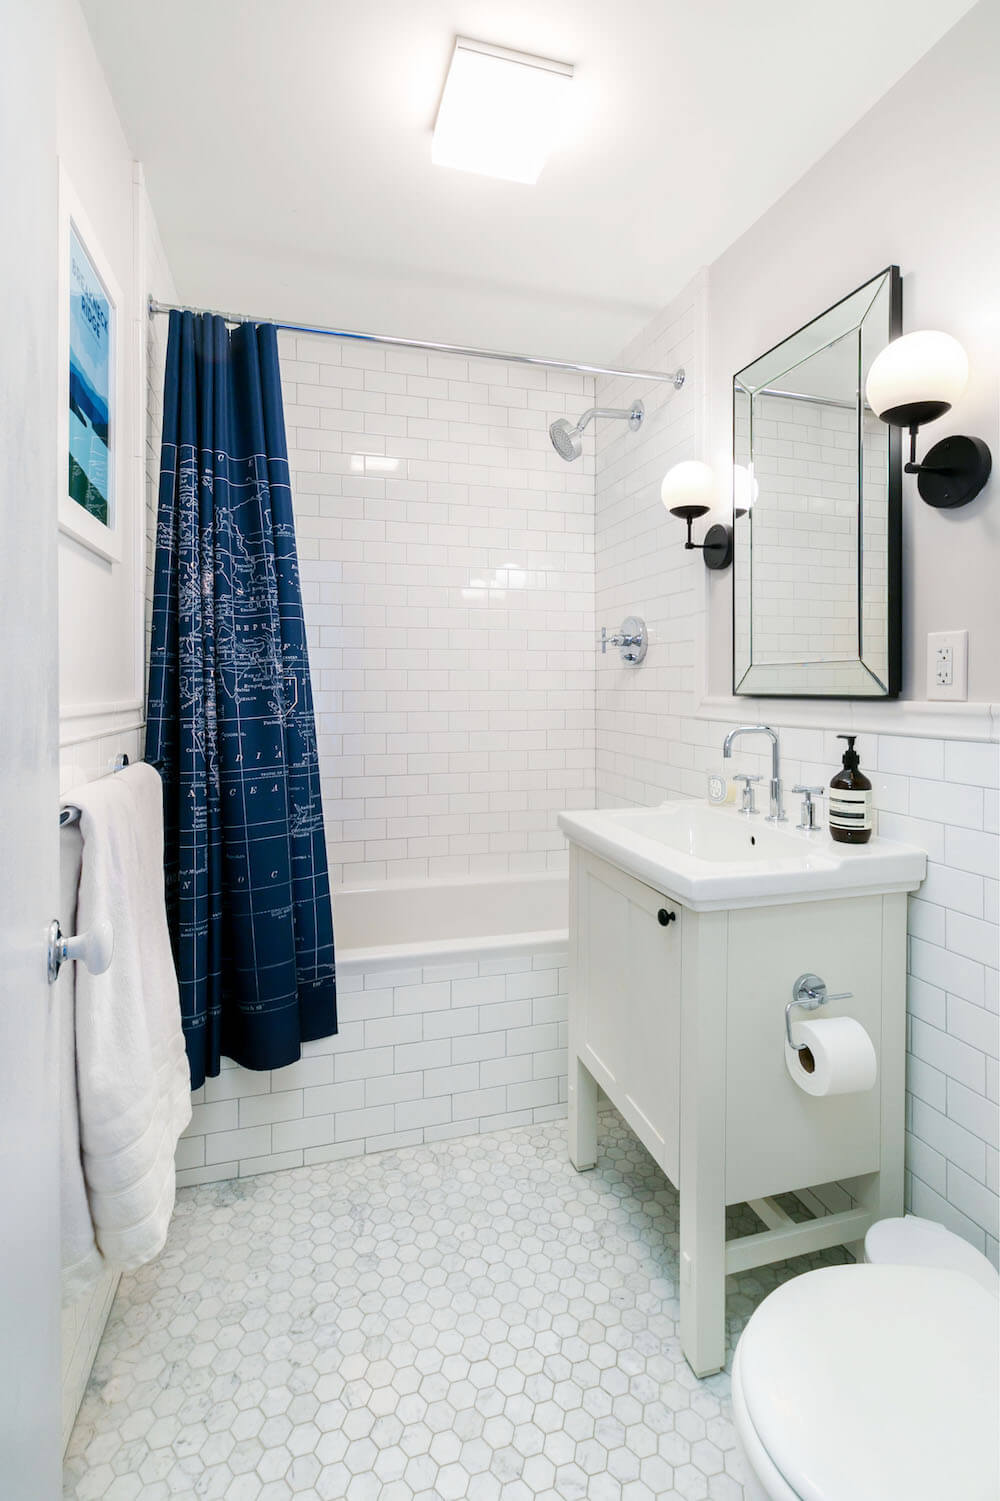 White subway tiles on wall with hex tiles on floor along with large mirror and vanity after renovation